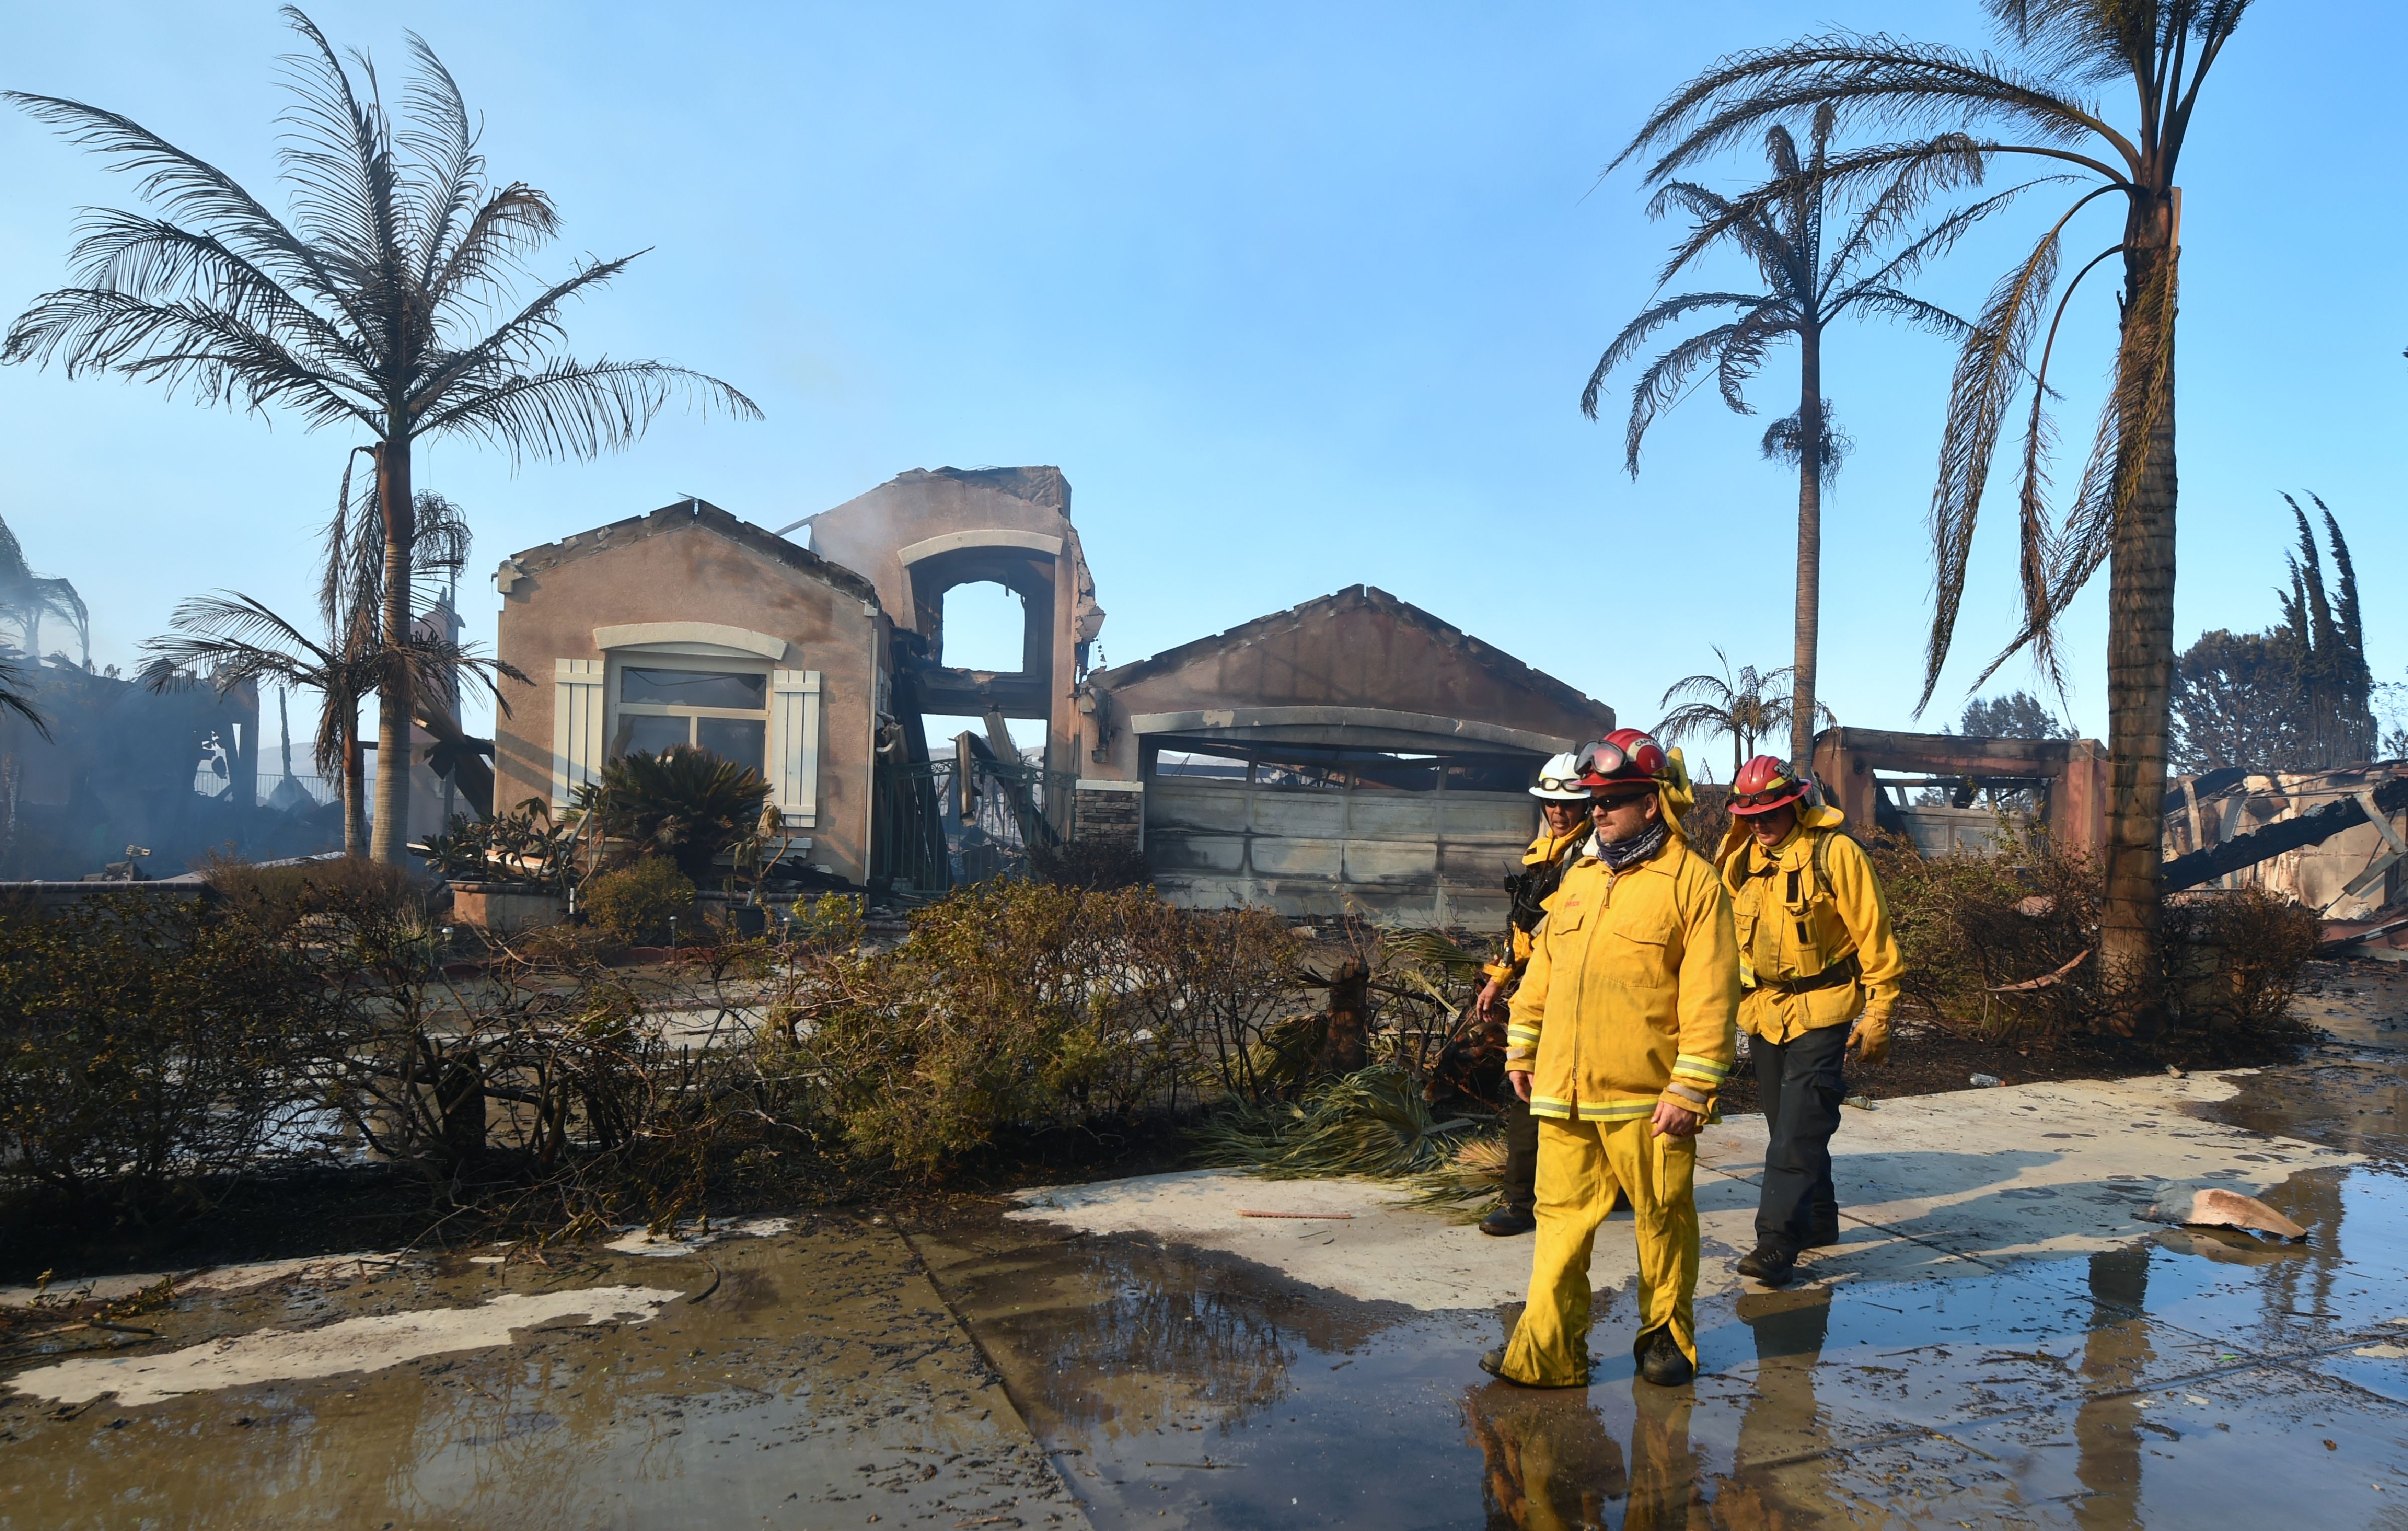 Homes are destroyed by fires in California